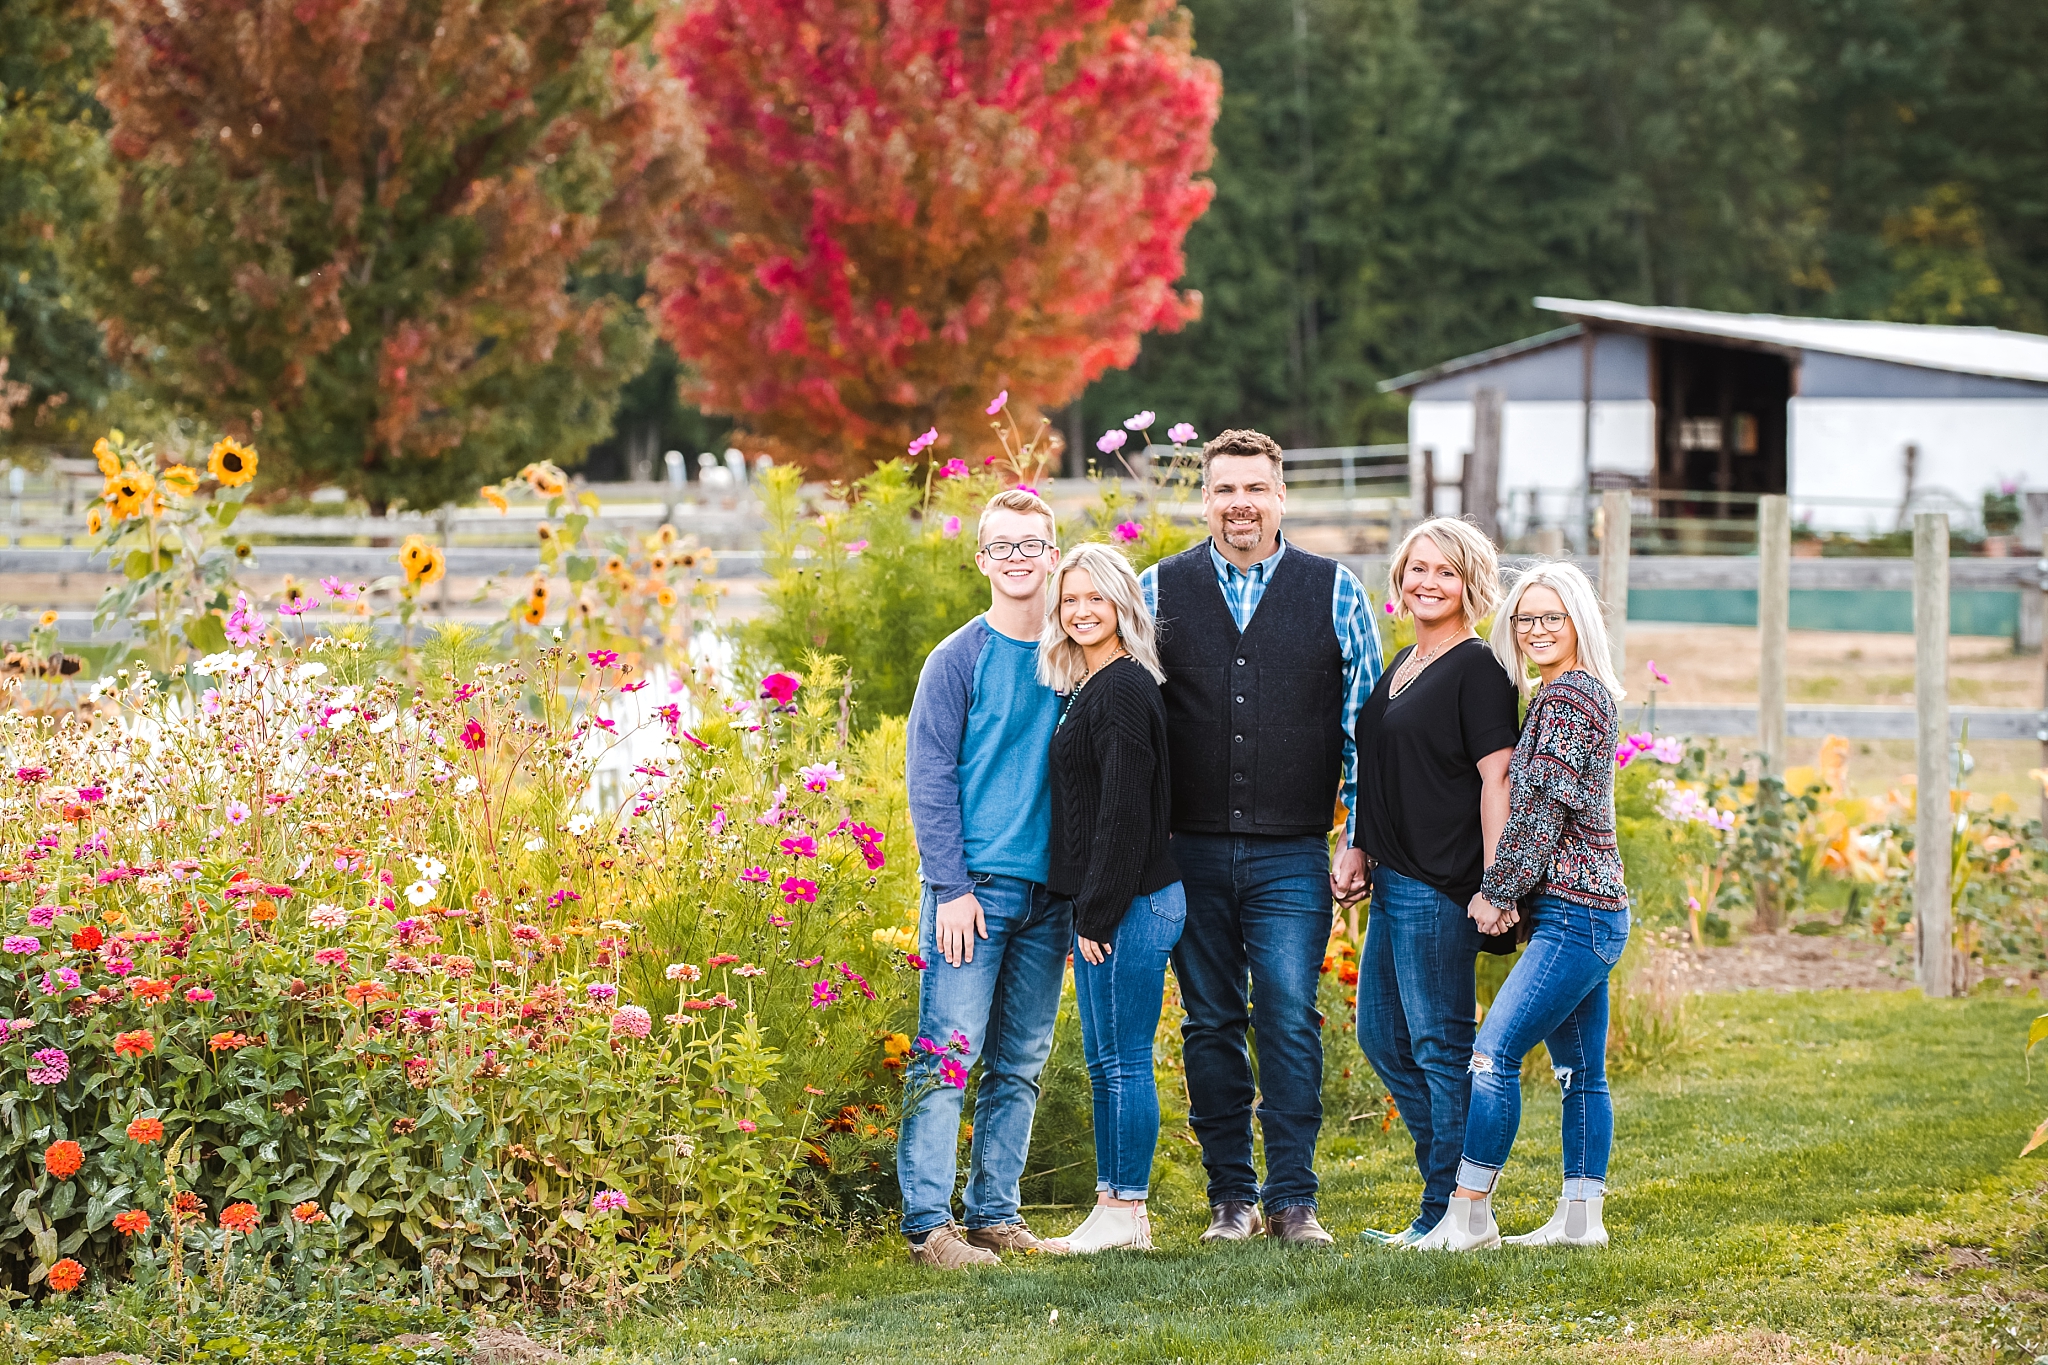  Fall Family Photographs in Ellensburg at Ritter Farms